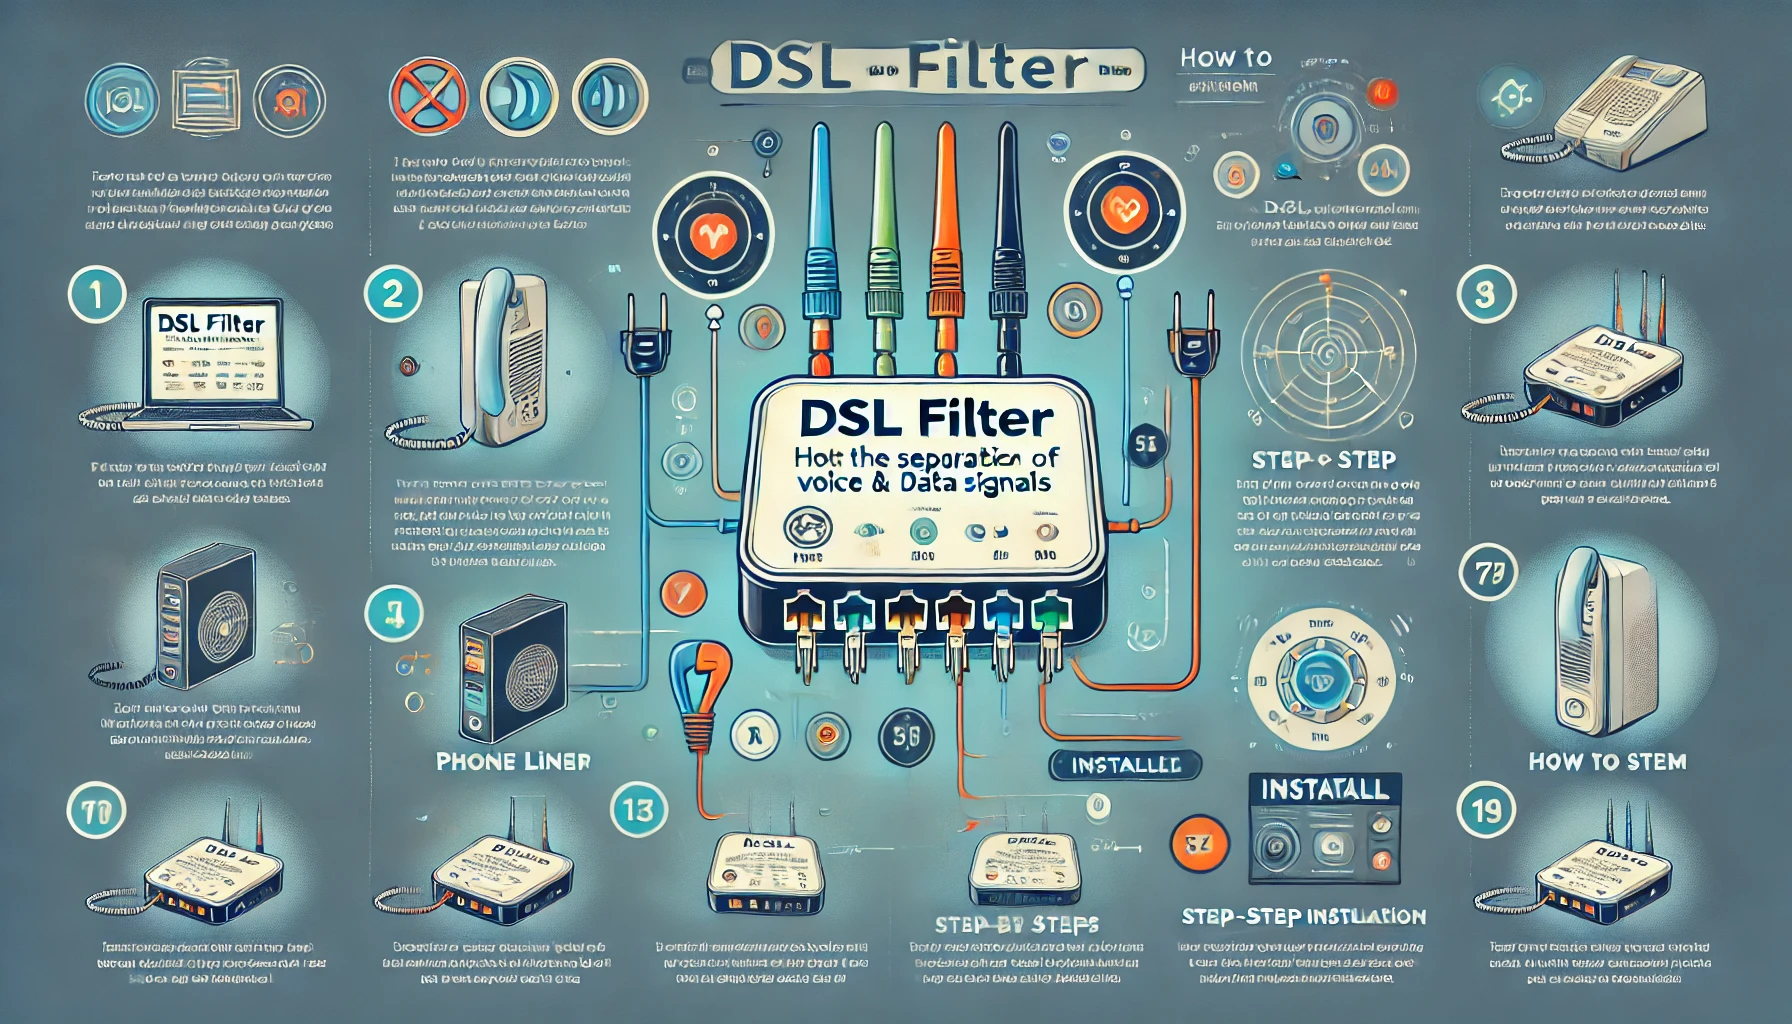 DSL Filters: Their Importance and How to Install Them